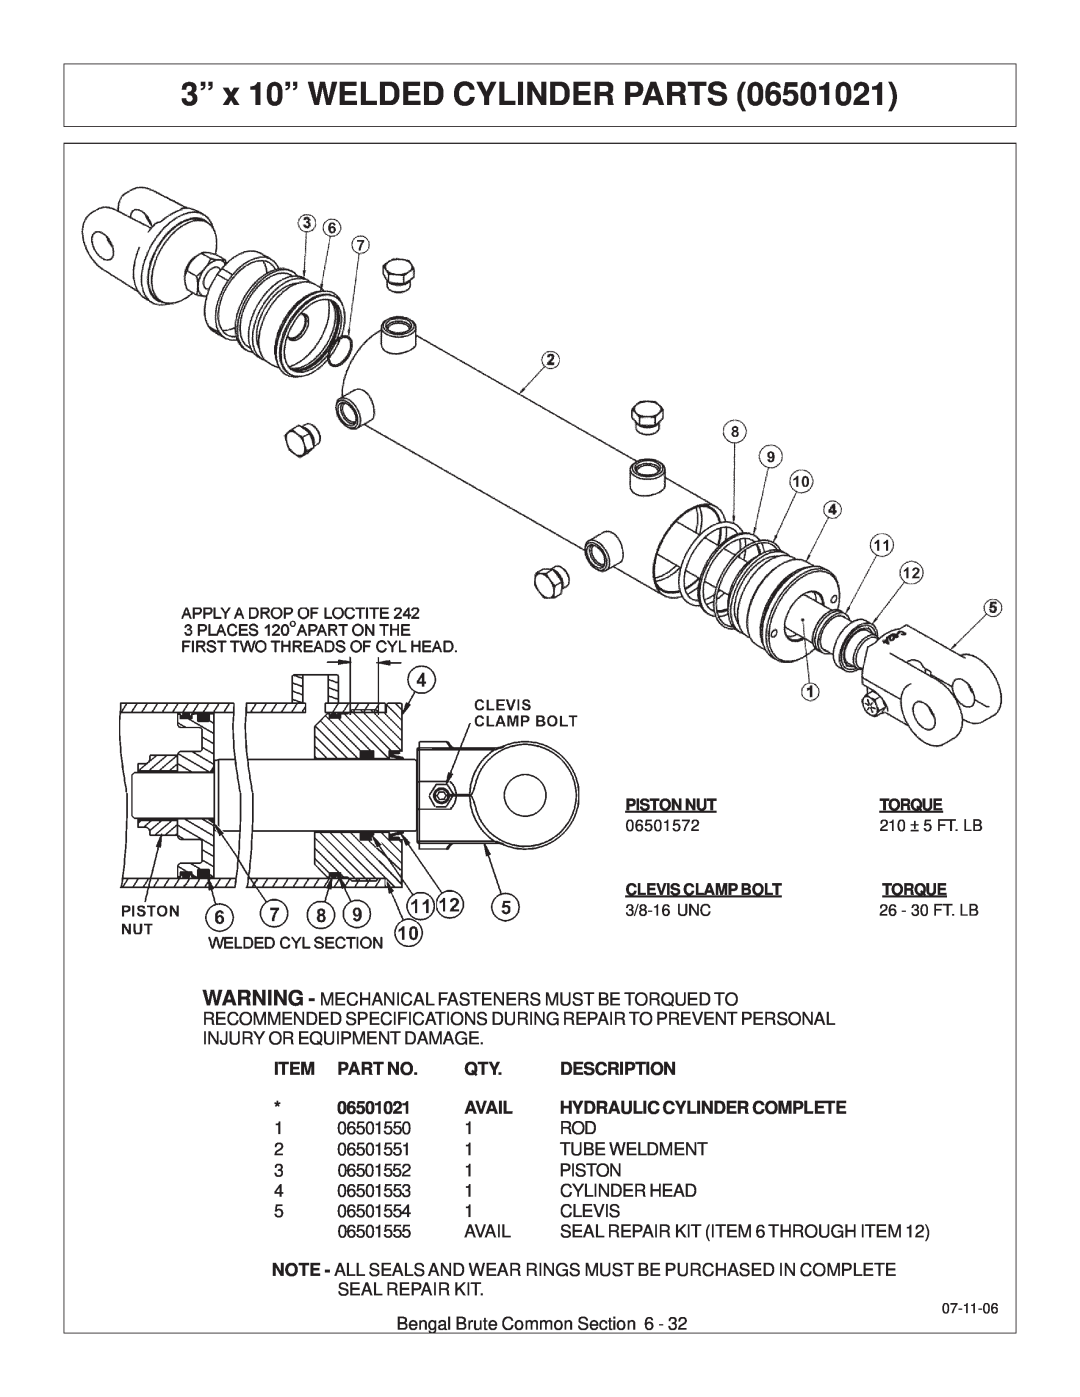 Tiger JD 62-6420 manual 3” x 10” WELDED CYLINDER PARTS, Description, 06501021, Avail, Hydraulic Cylinder Complete 